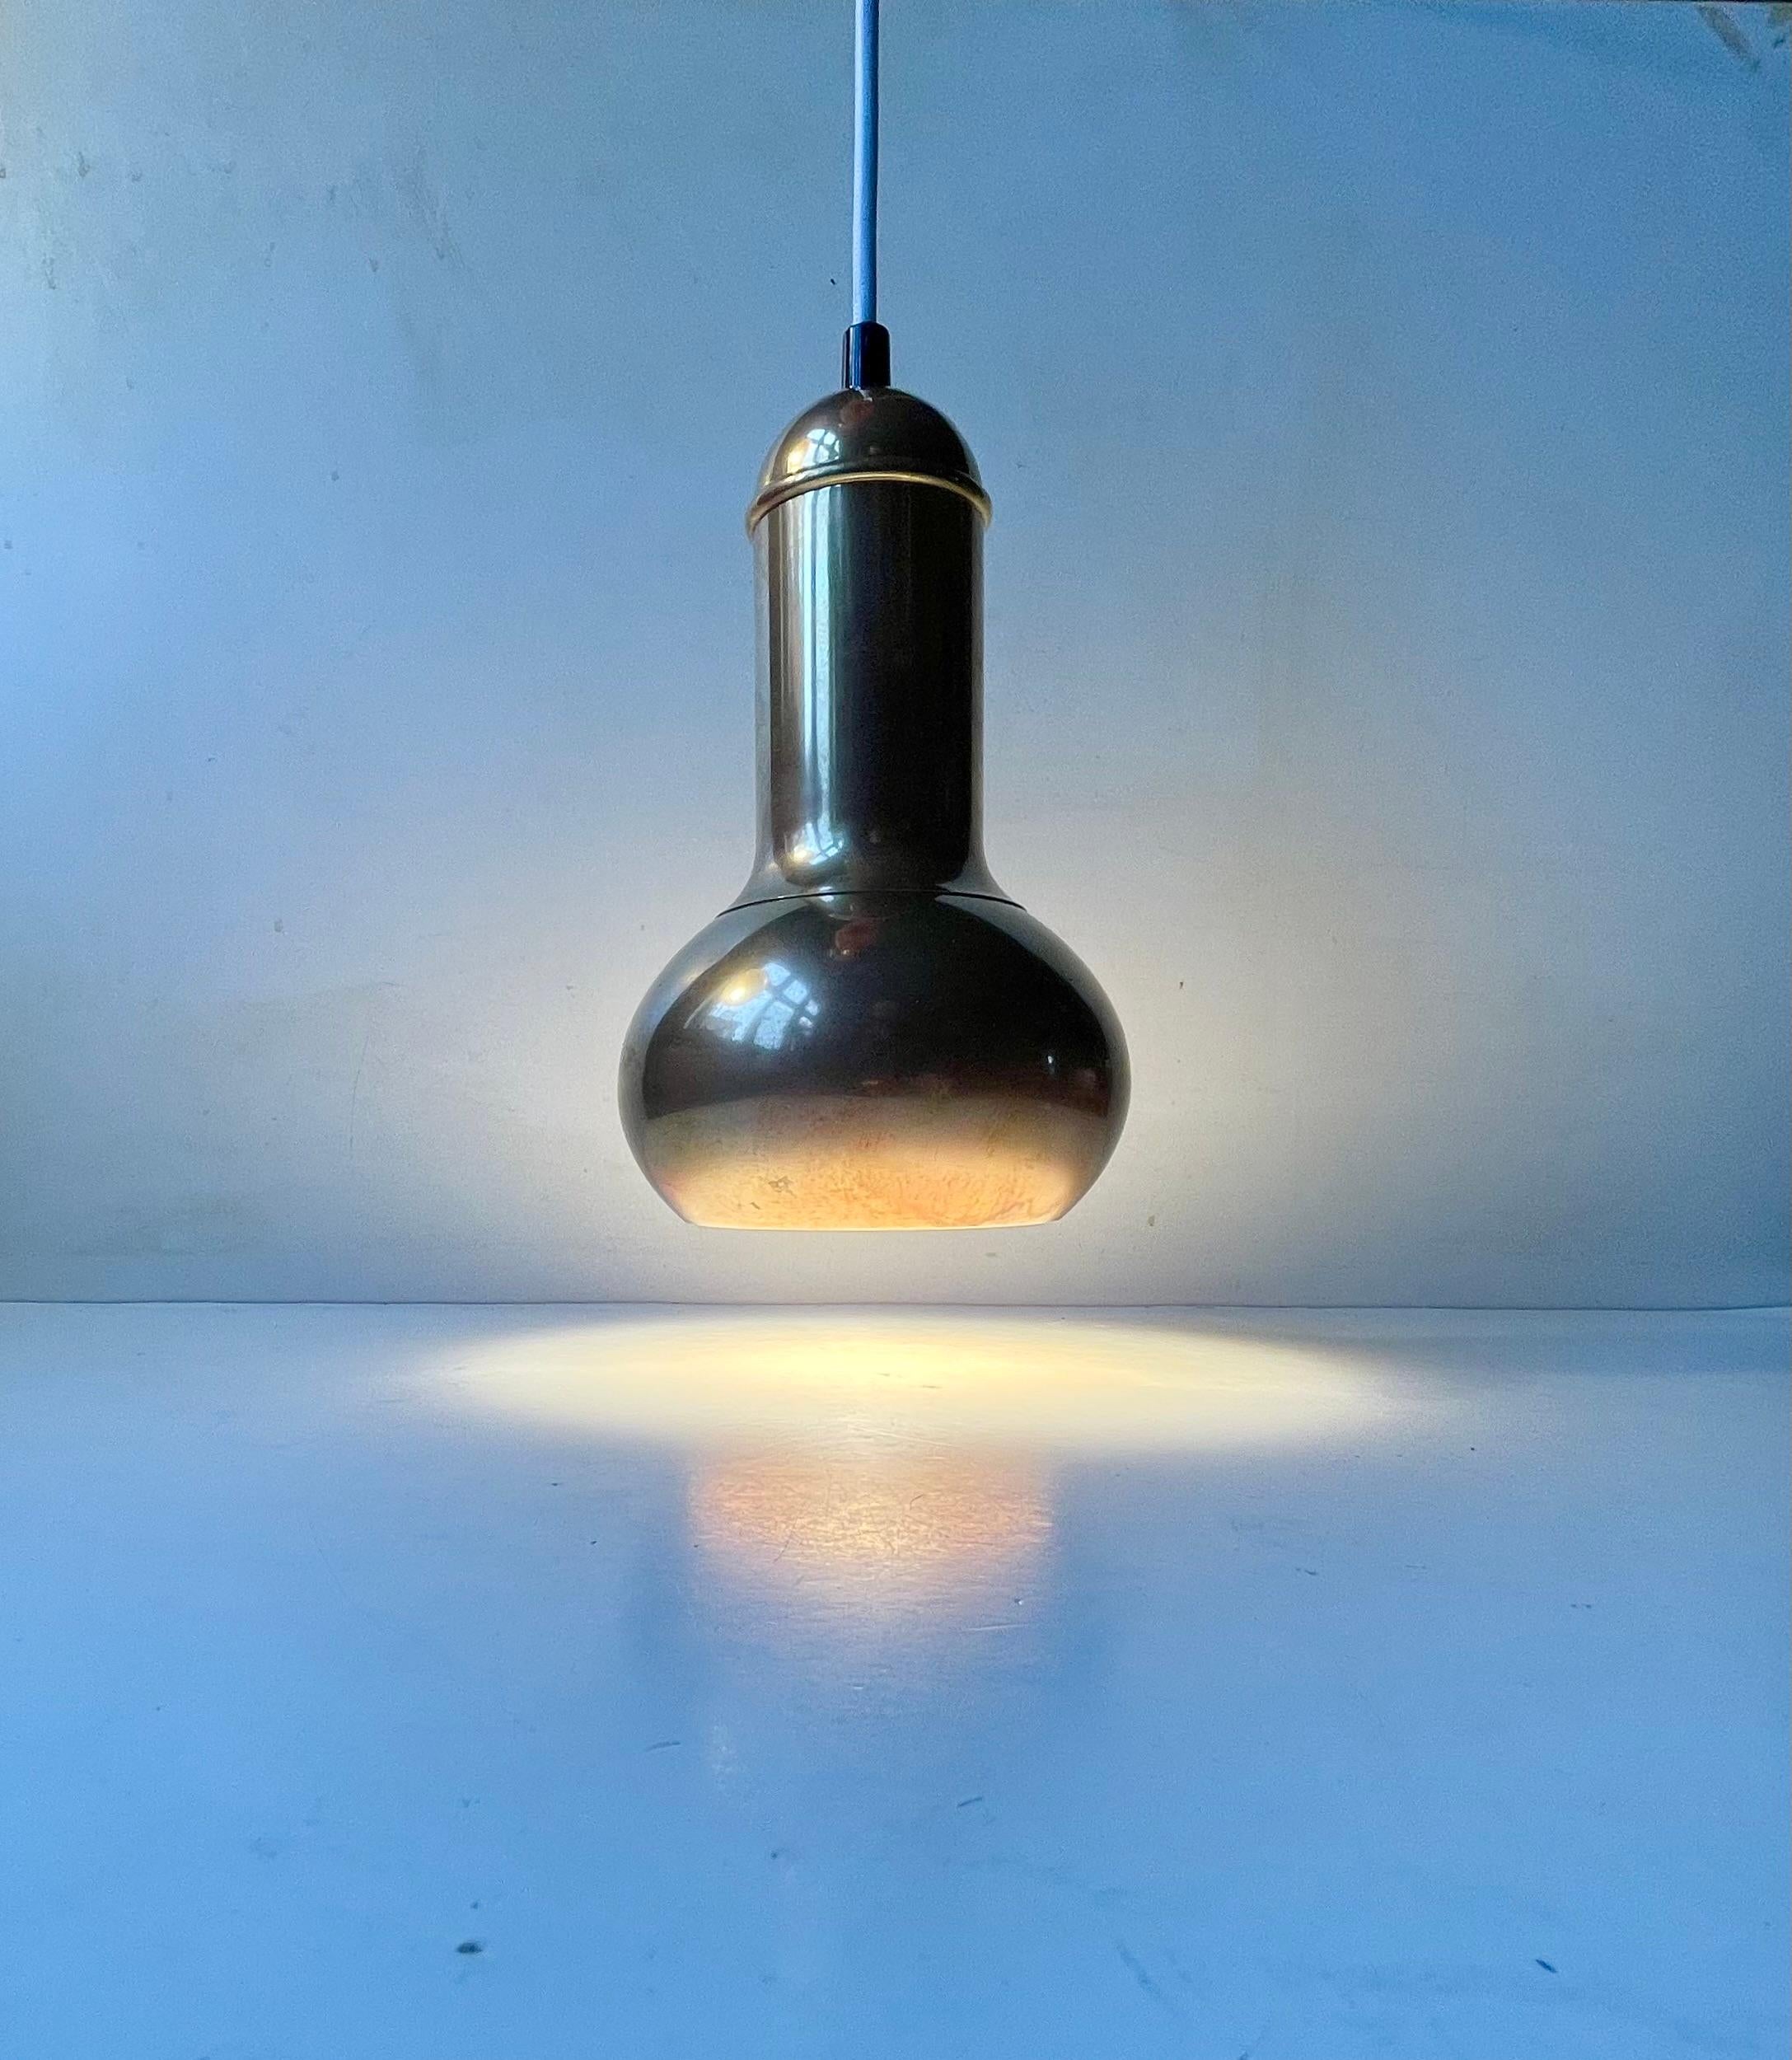 A fallos shaped solid brass pendant lamp made and designed by Frandsen Belysning in Denmark circa 1970-75. Stylistically its inspired by earlier pieces by Tynell and Lisa Papé Johansson. It measures 23 cm in height and has a diameter of 14 cm.